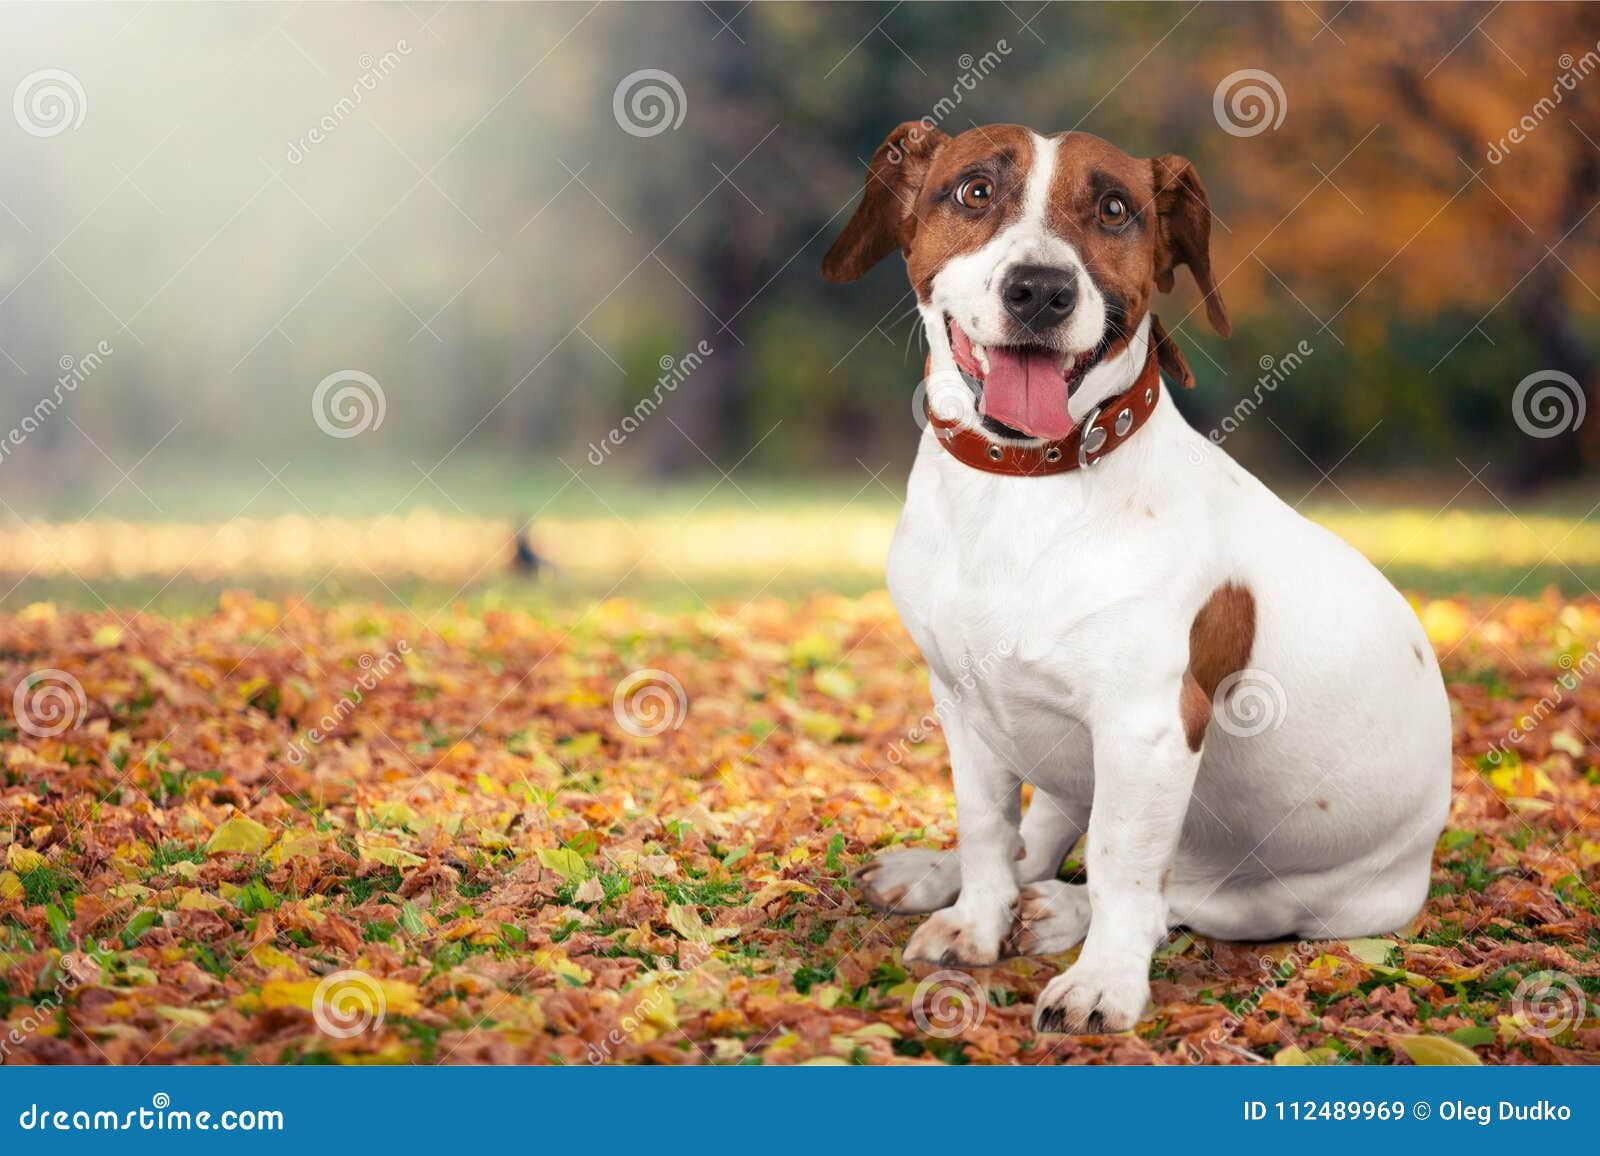 cute small dog jack russell terrier on background